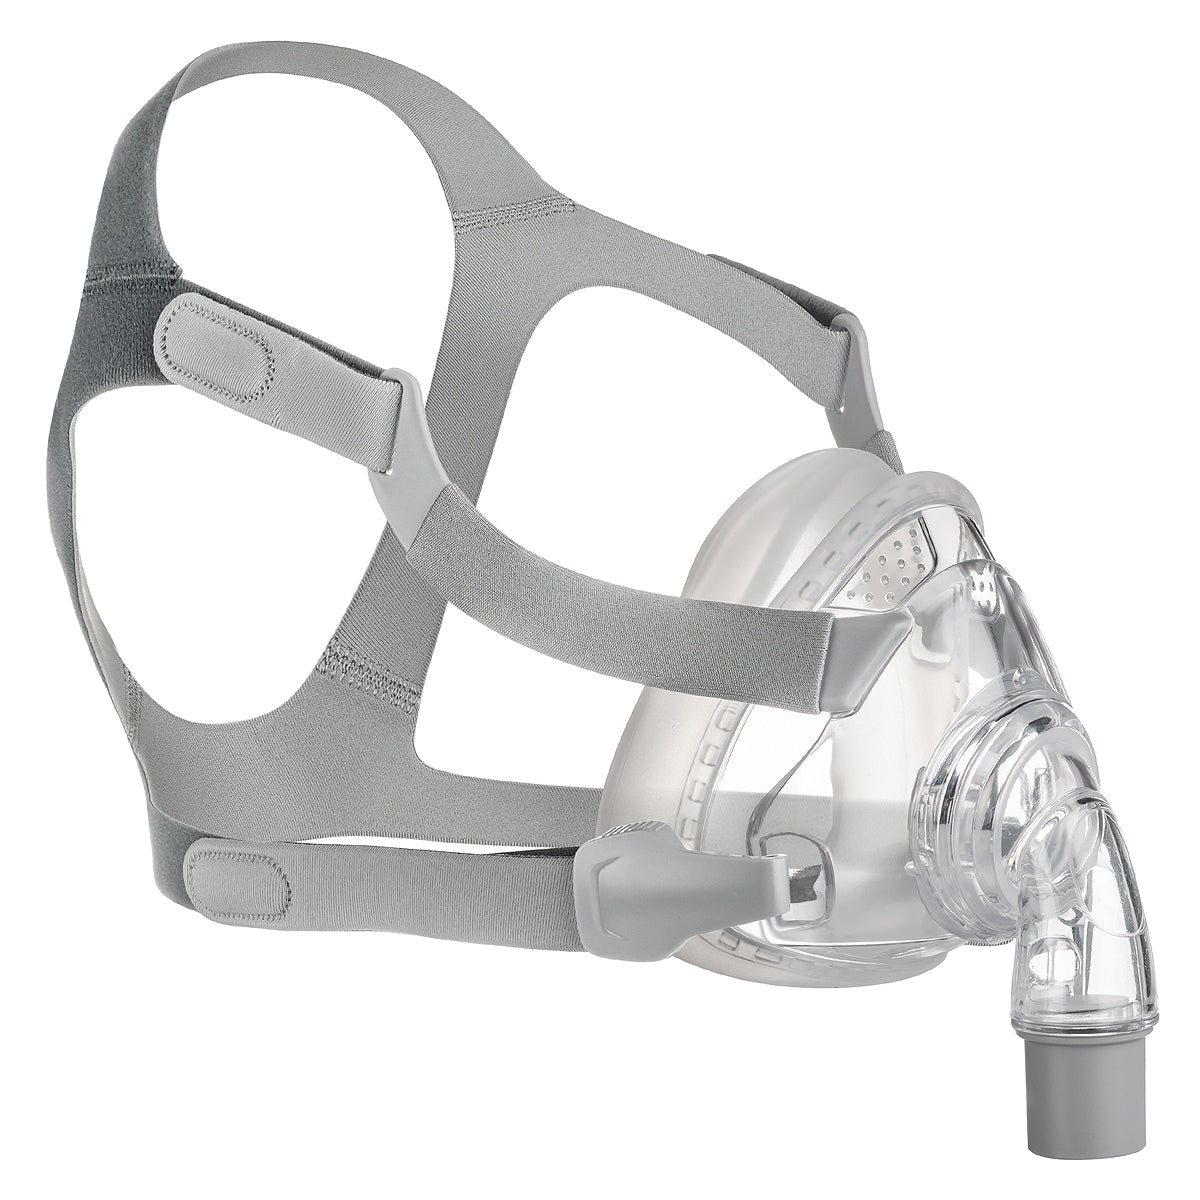 The Siesta Full Face Mask from 3B Medical has a lightweight frame and eliminates forehead support providing a clear line of sight, so you'll hardly know it's there. This FitPack includes Small, Medium &amp; Large Full Face Cushions so you can try each one and find your best fit right out of the box.